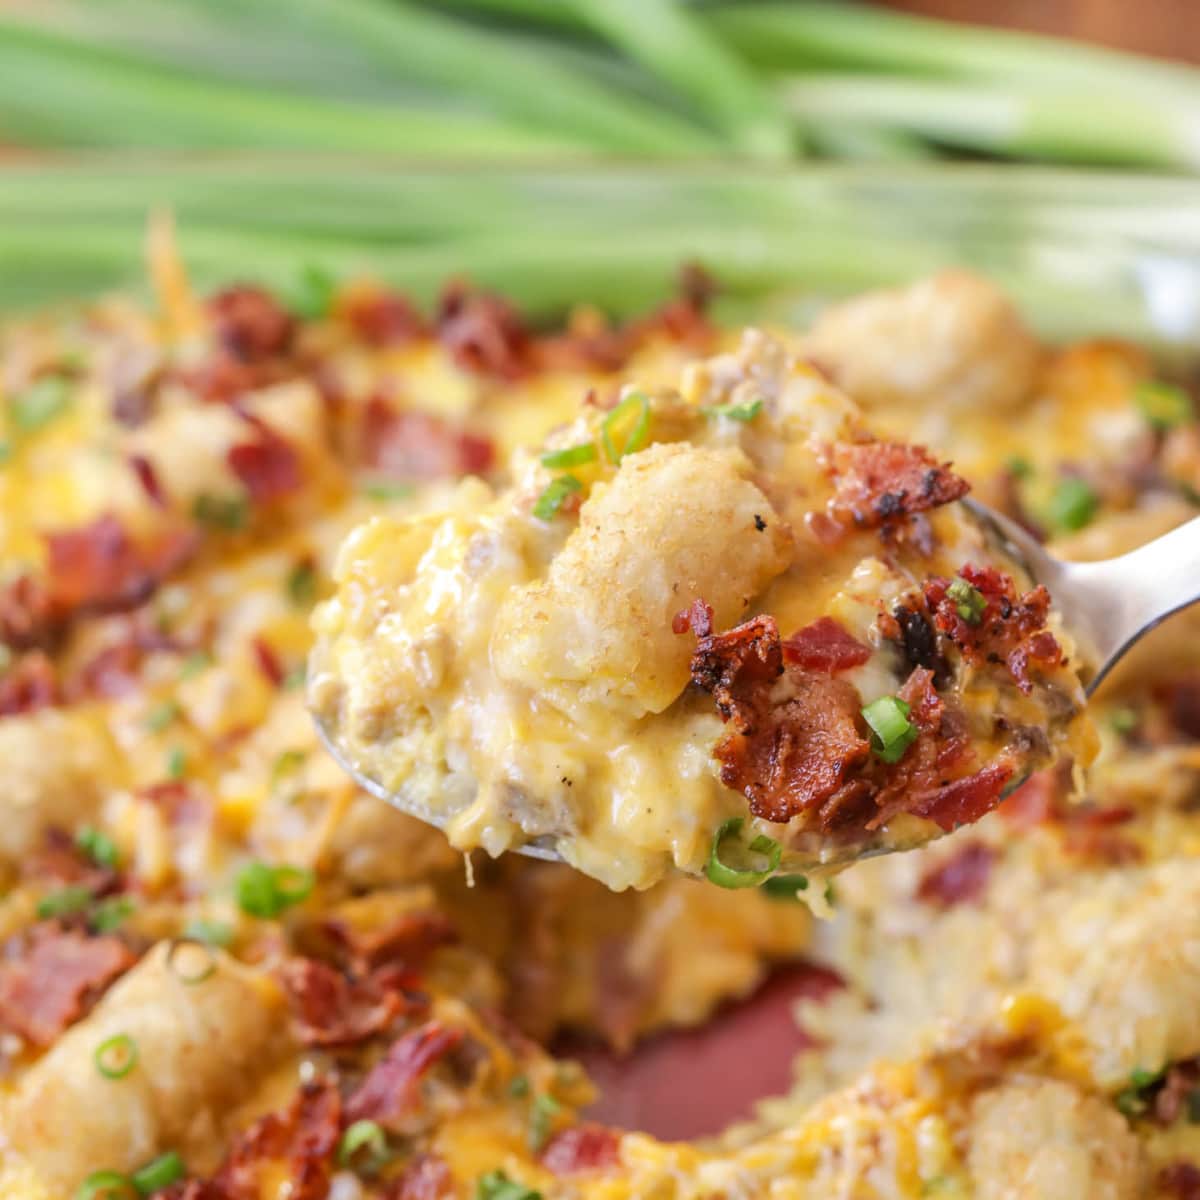 Christmas breakfast ideas - scooping out a serving of tater tot breakfast casserole.